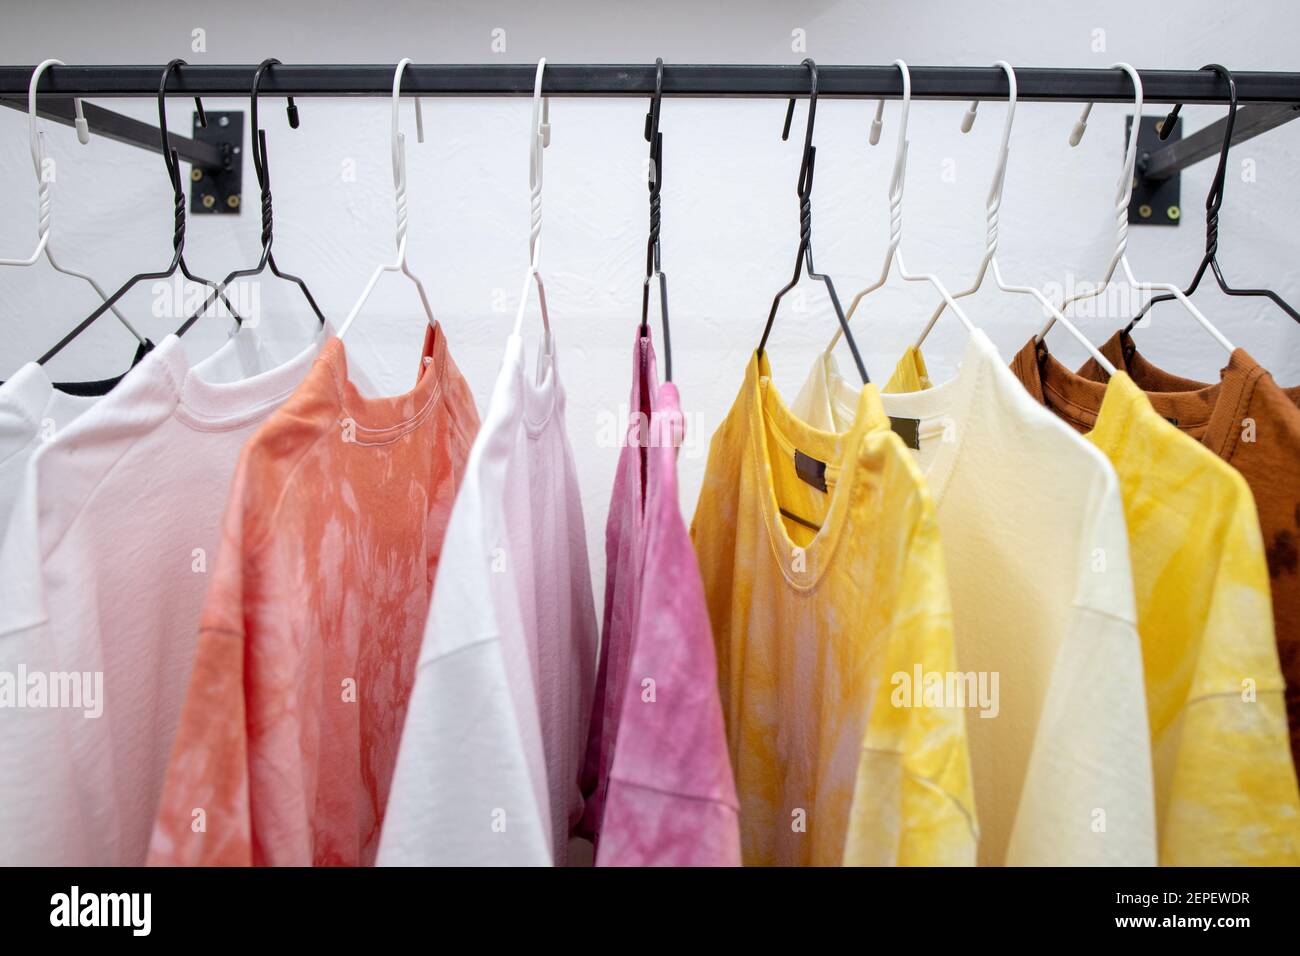 https://c8.alamy.com/comp/2EPEWDR/fashion-casual-t-shirts-hanging-at-store-place-colorful-choice-for-buy-clothes-2EPEWDR.jpg